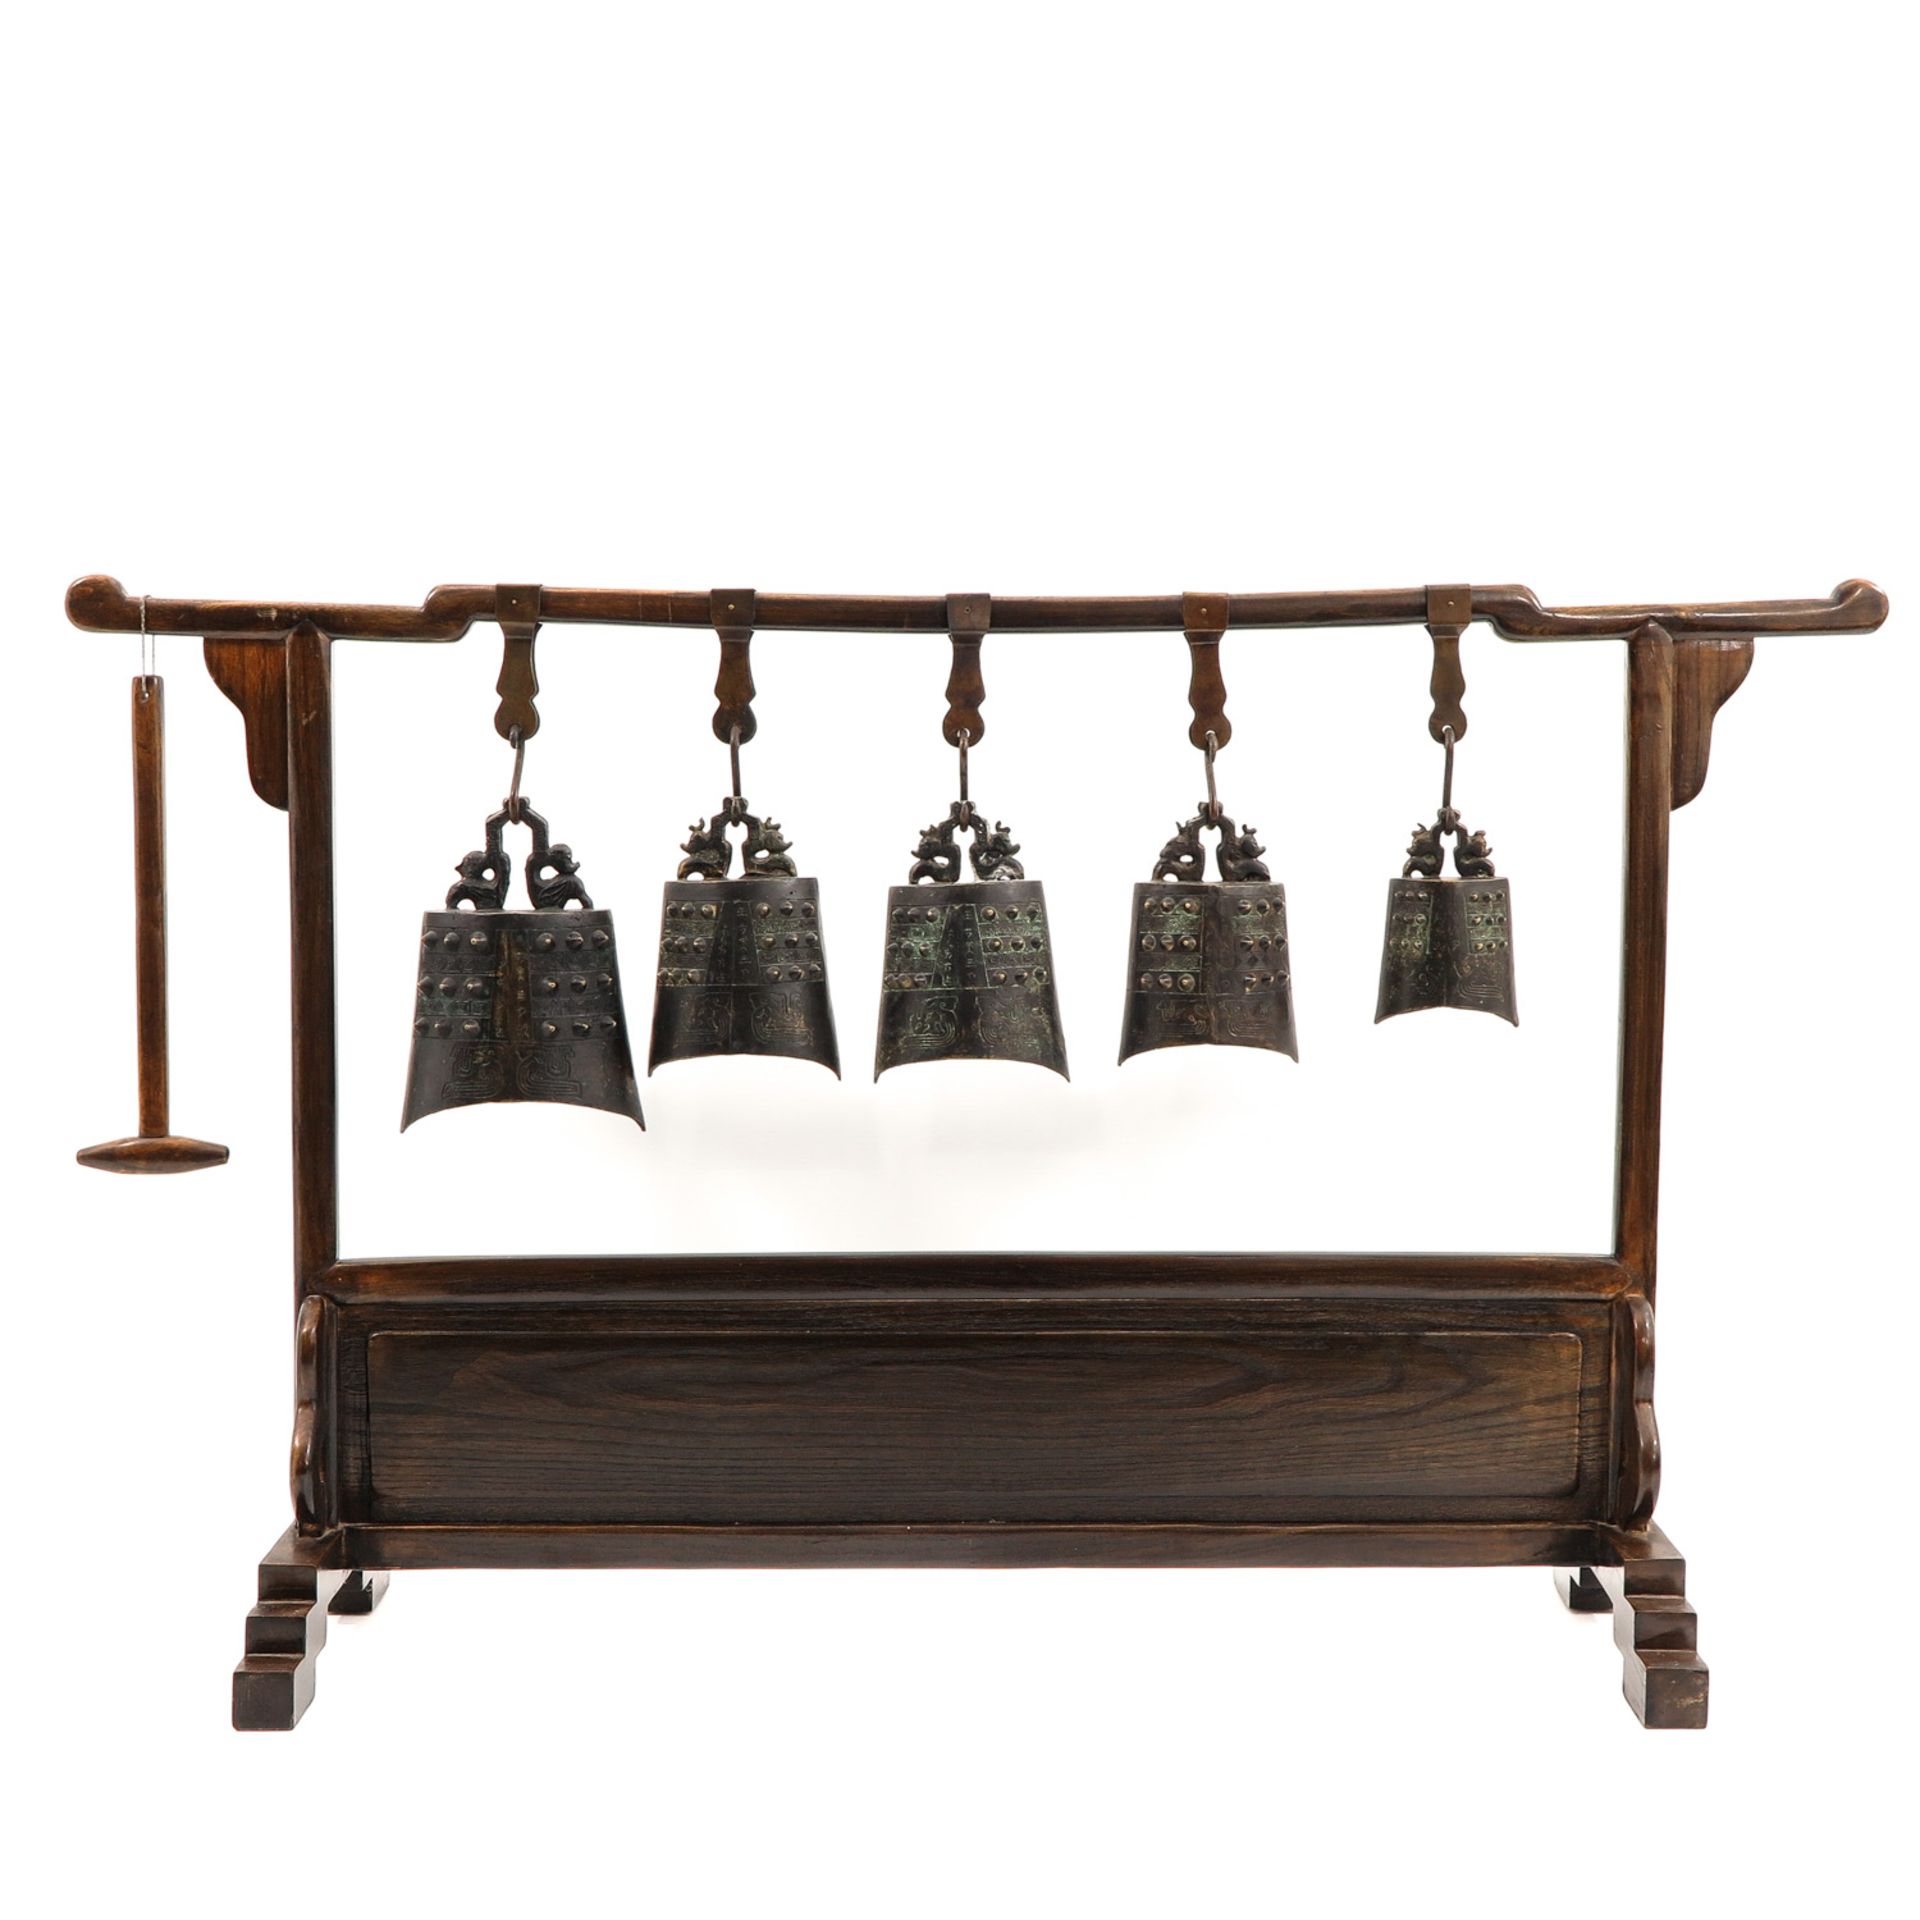 A Chinese Standing Rack with Bells and Mallet - Image 3 of 8